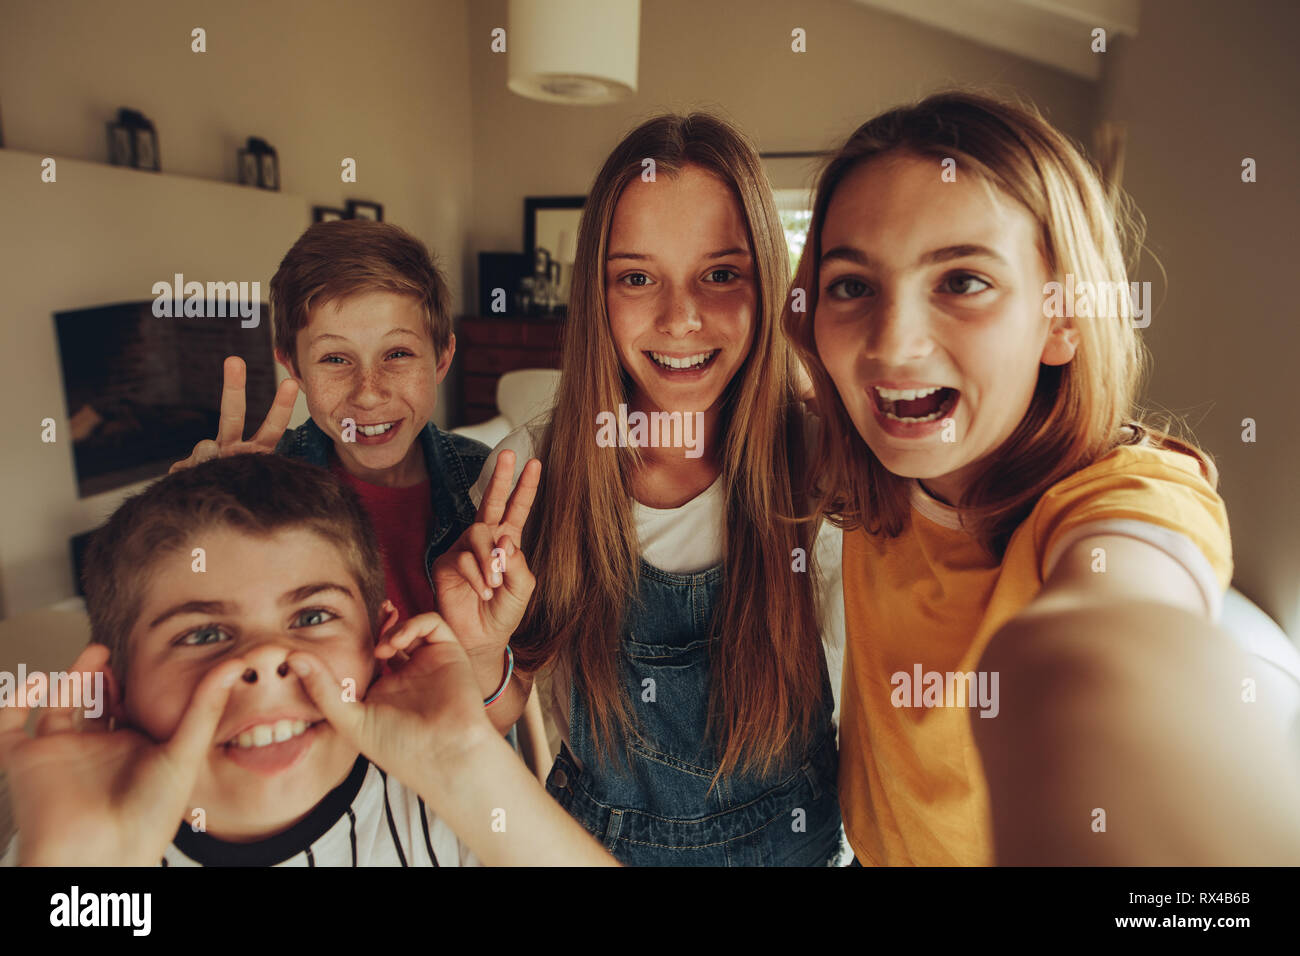 Cheerful kids making funny faces and showing victory sign while taking a selfie. Kids enjoying their time having fun at home. Stock Photo